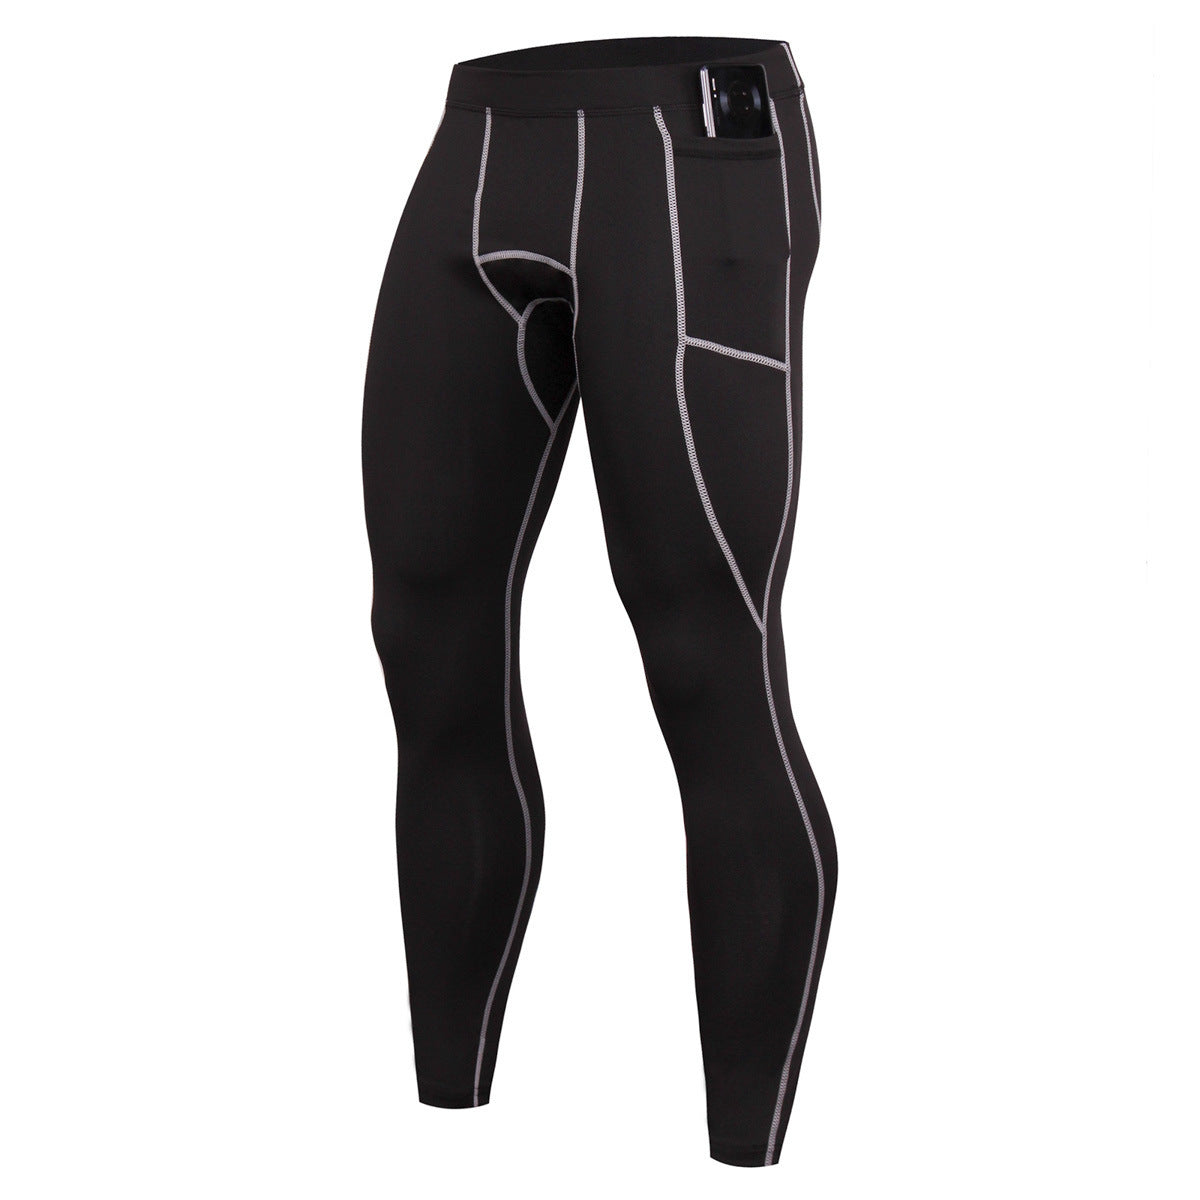 Men's Running Sports Tight-Fitness Pants for Active Workouts